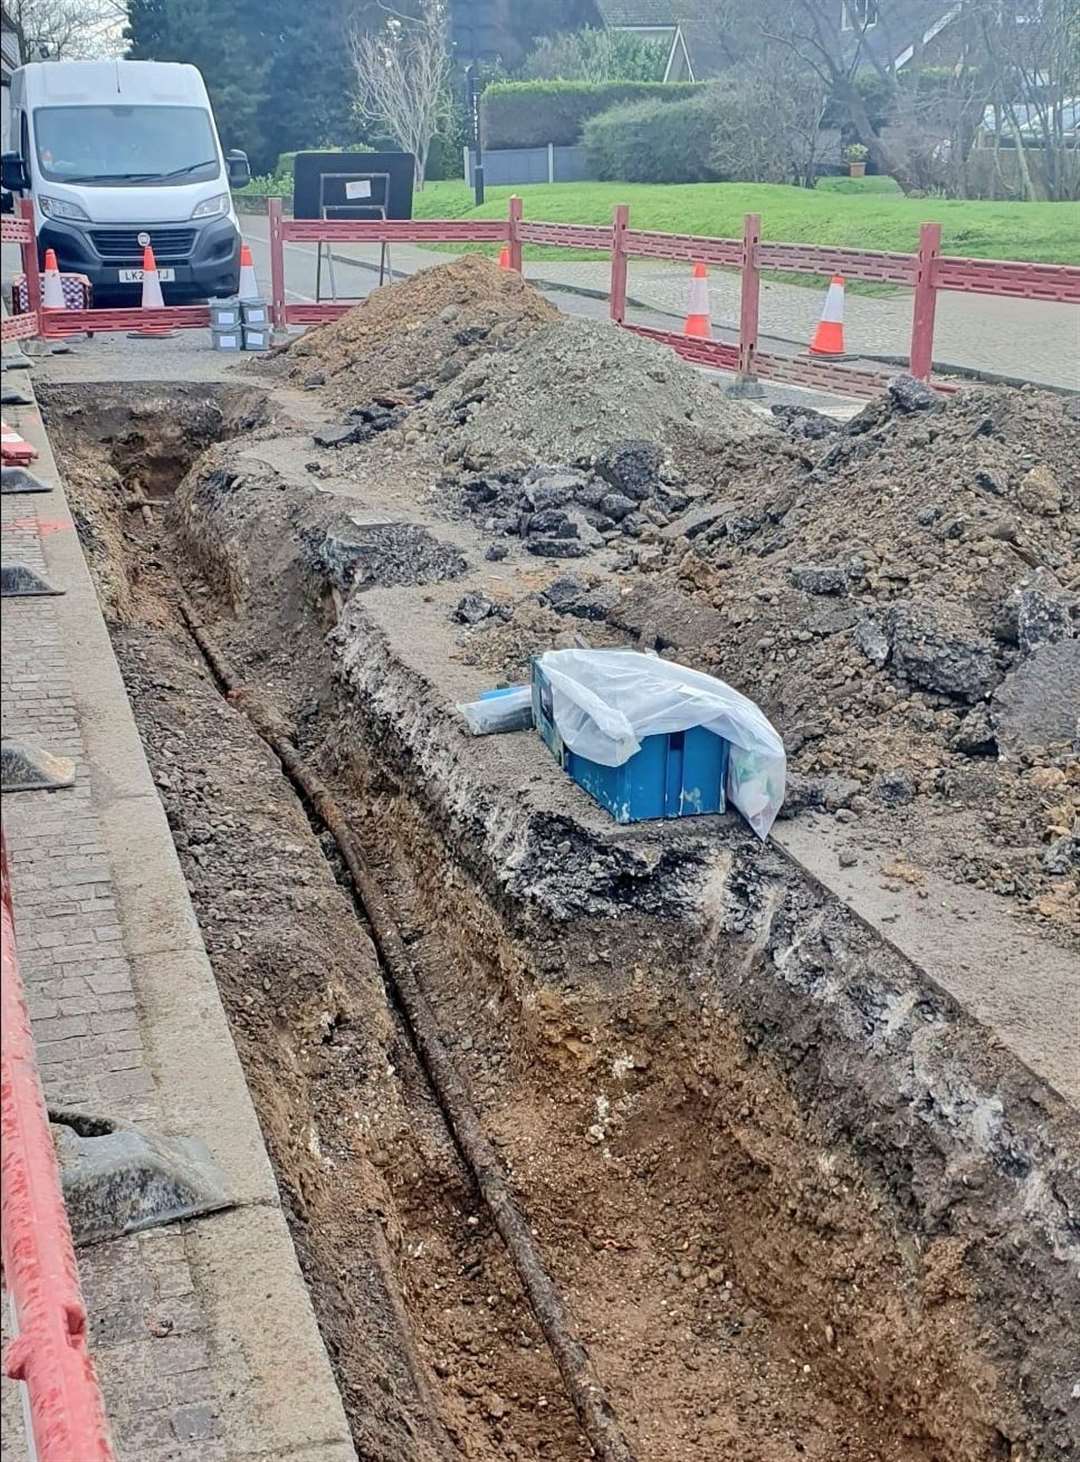 The road is being dug up by UK Power Network. Photo credit: Severine Ashby